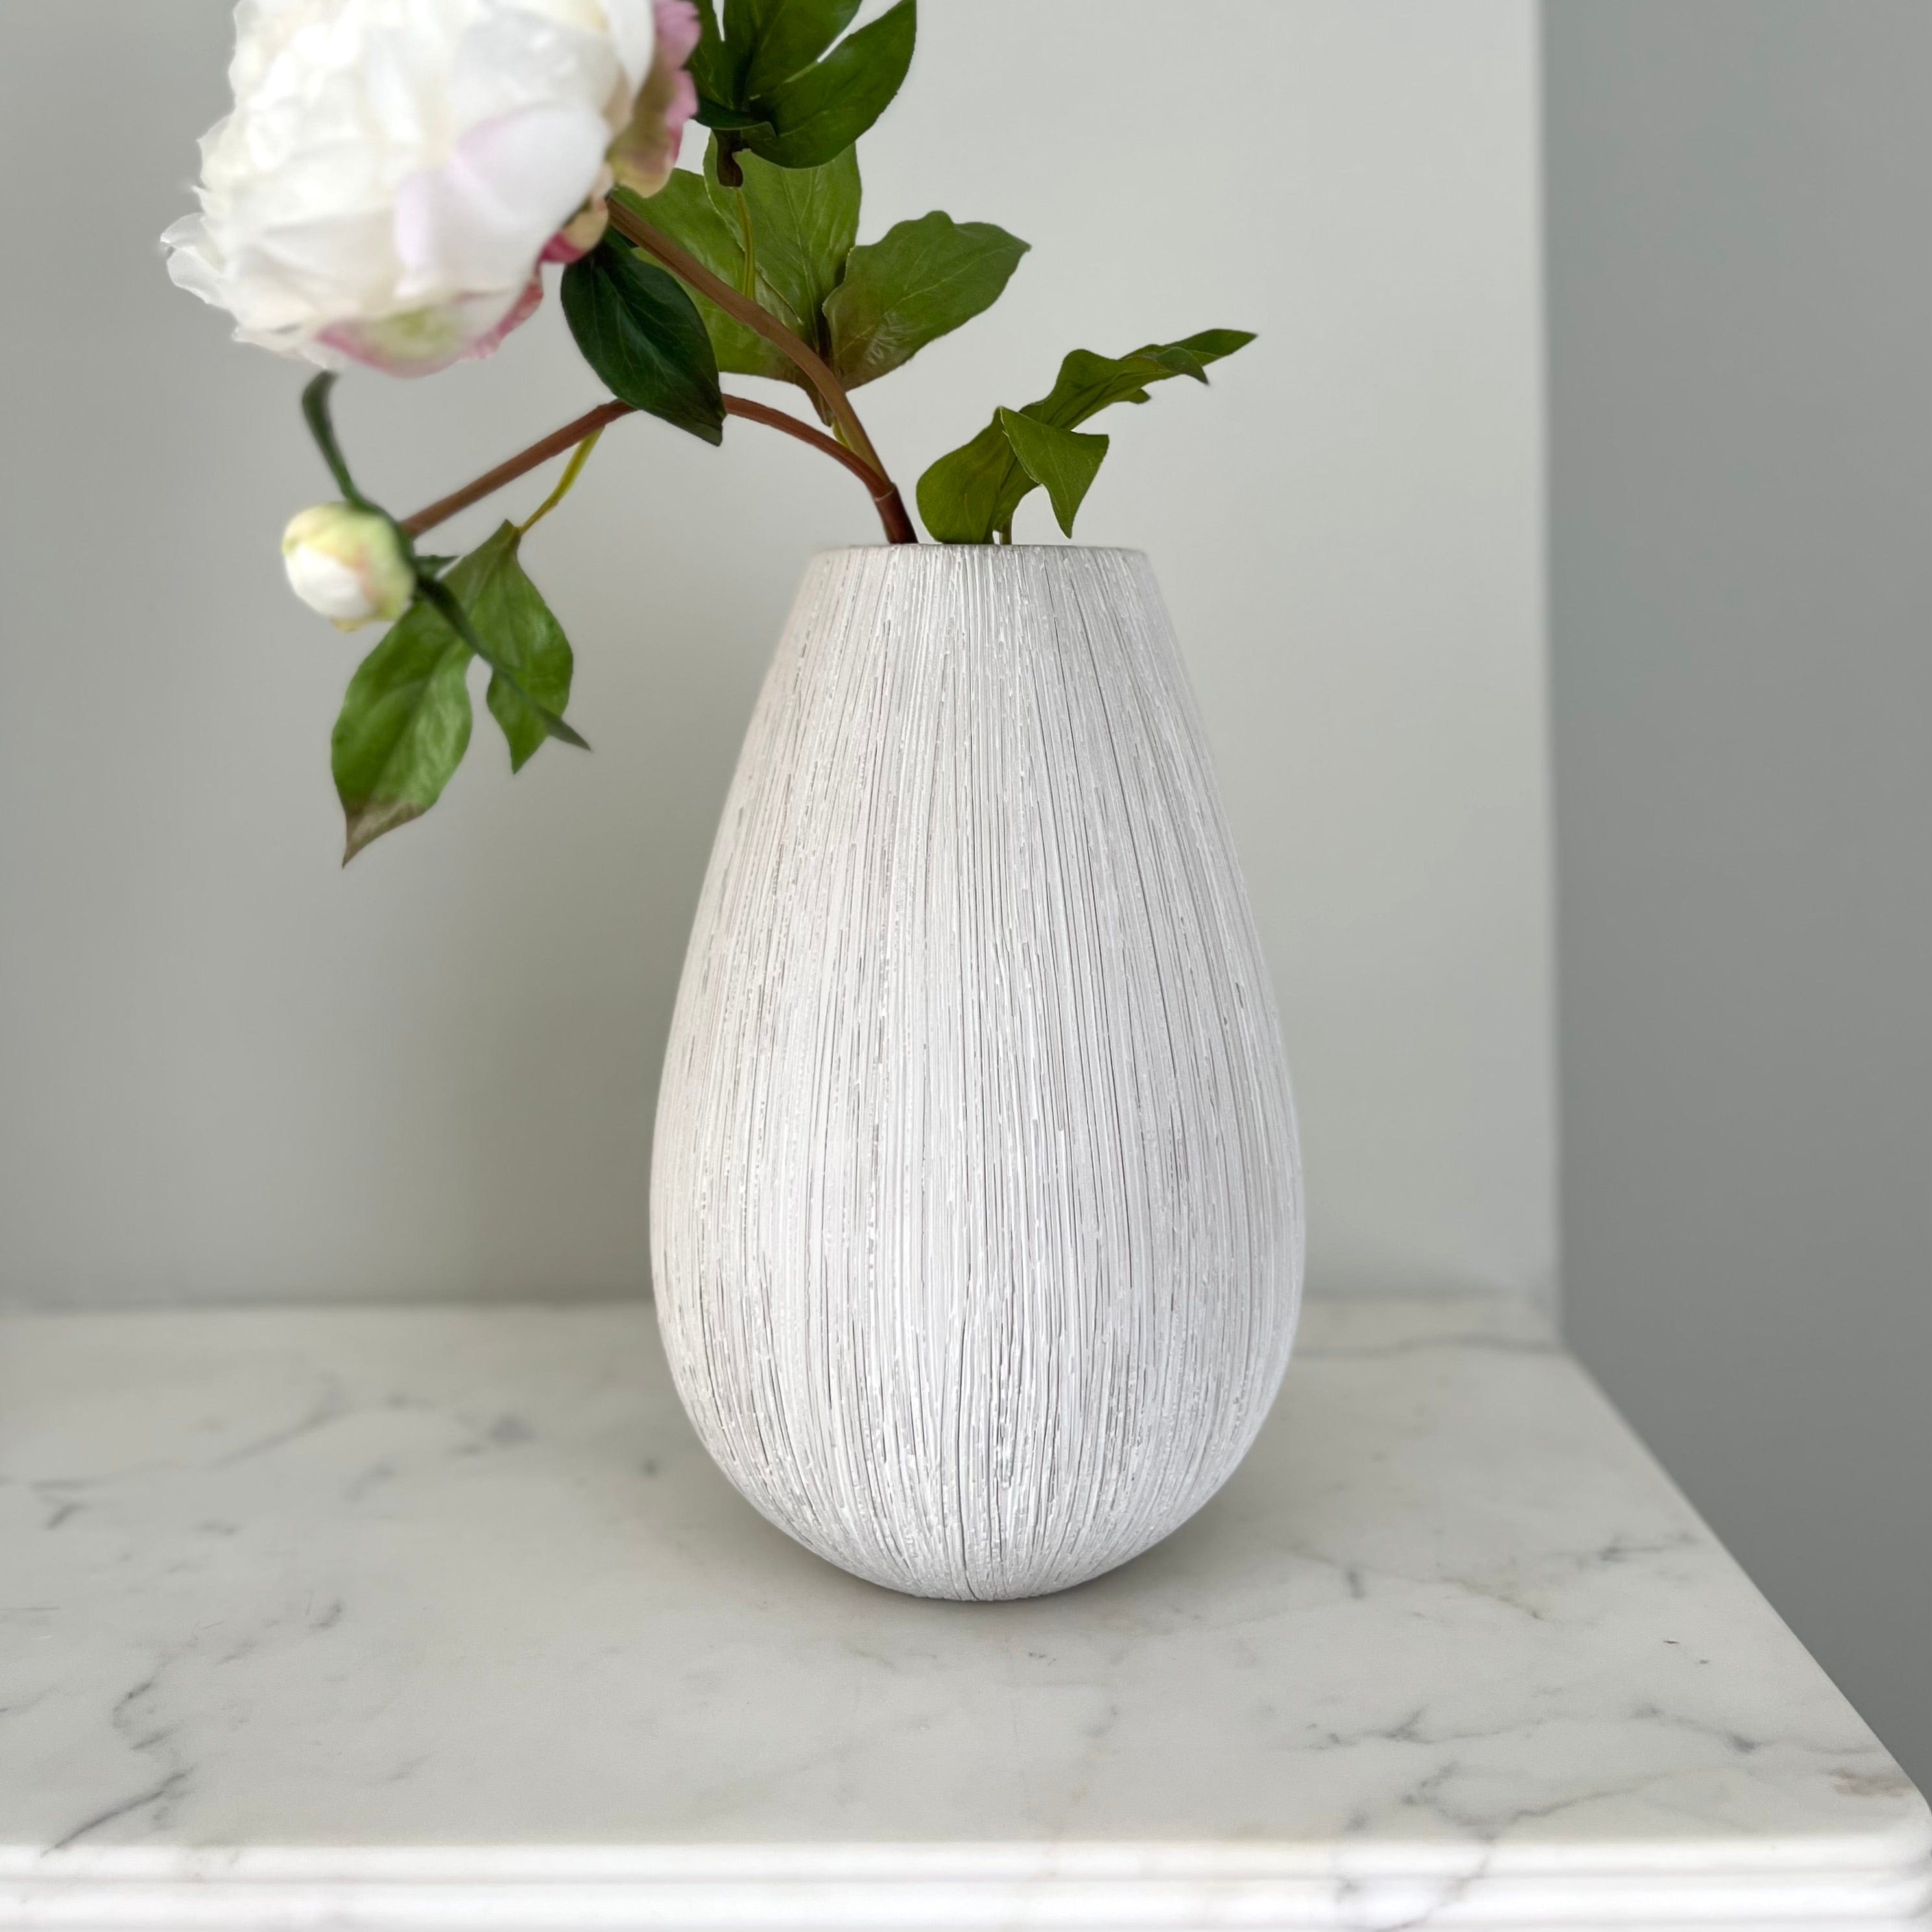 Artificial Flowers in Vase Stylish Vases White Bibury Vase Home Decor and Accessories The Faux Flower Company UK ABP1513